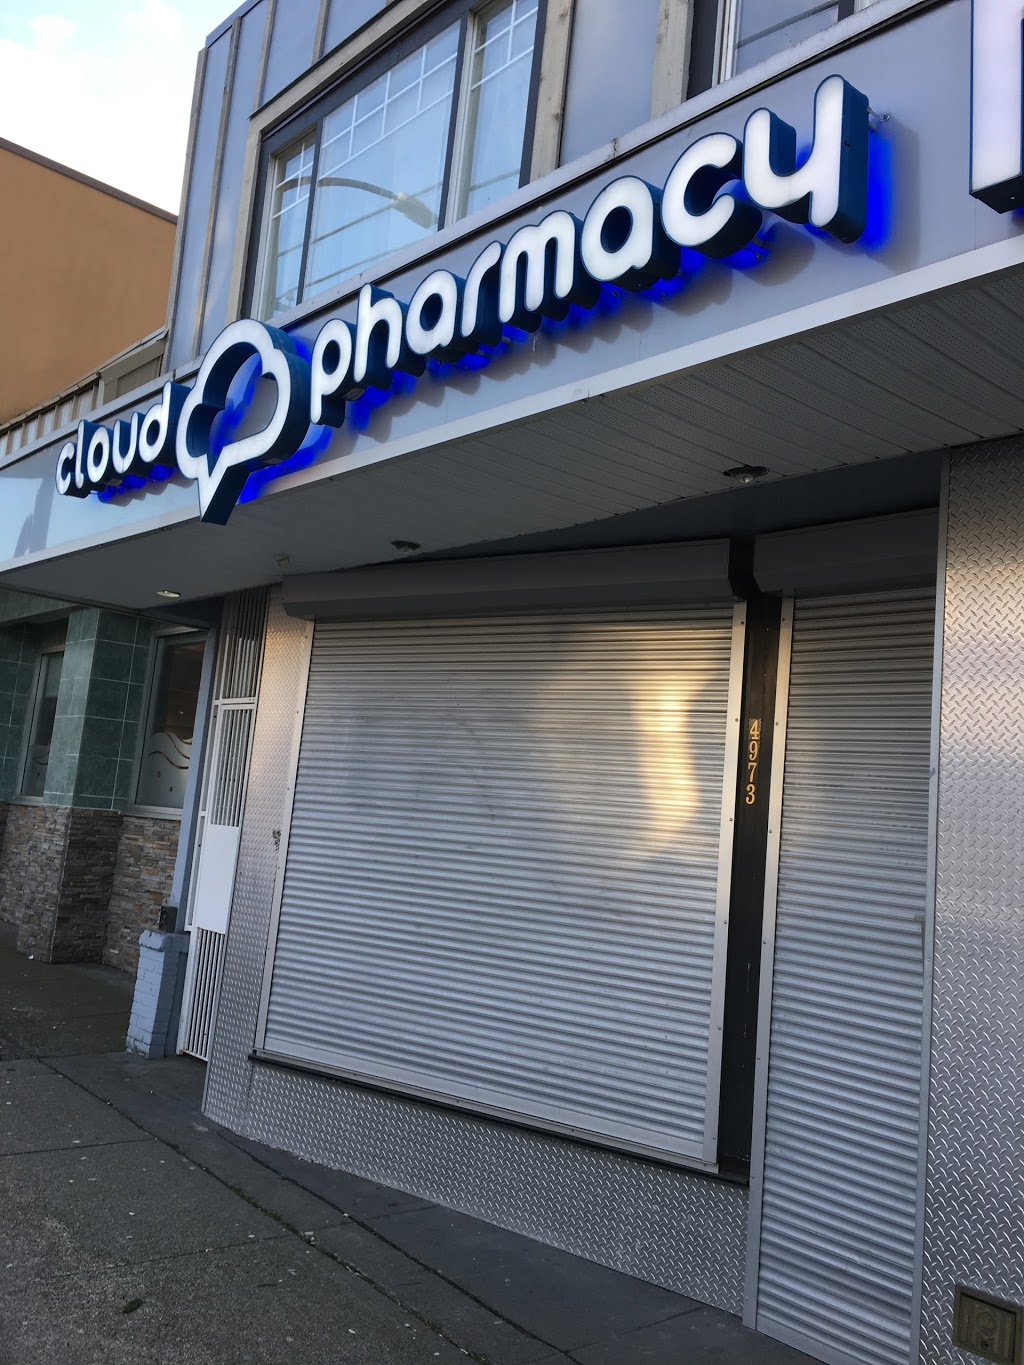 Cloud Pharmacy Inc. | health | 4918 Victoria Dr, Vancouver, BC V5P 3T6, Canada | 8009010041 OR +1 800-901-0041